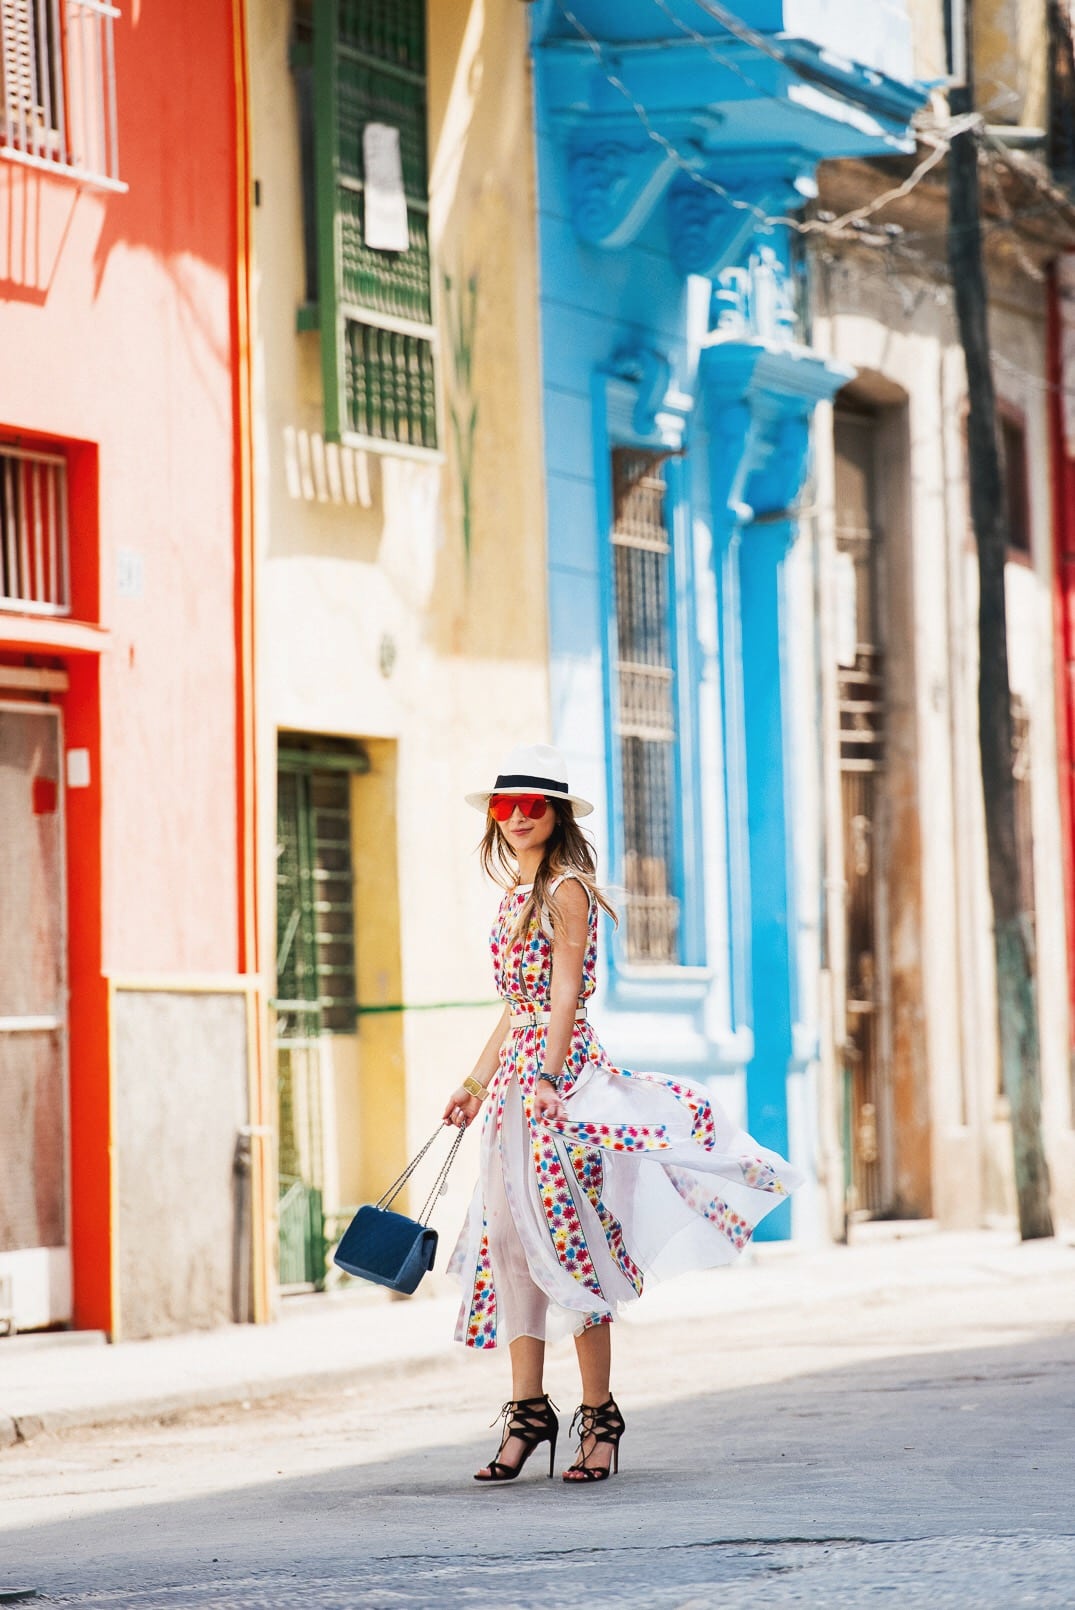 CHANEL Editorial in Cuba, Chanel Airlines Collection Dress, The Girl From Panama @pamhetlinger